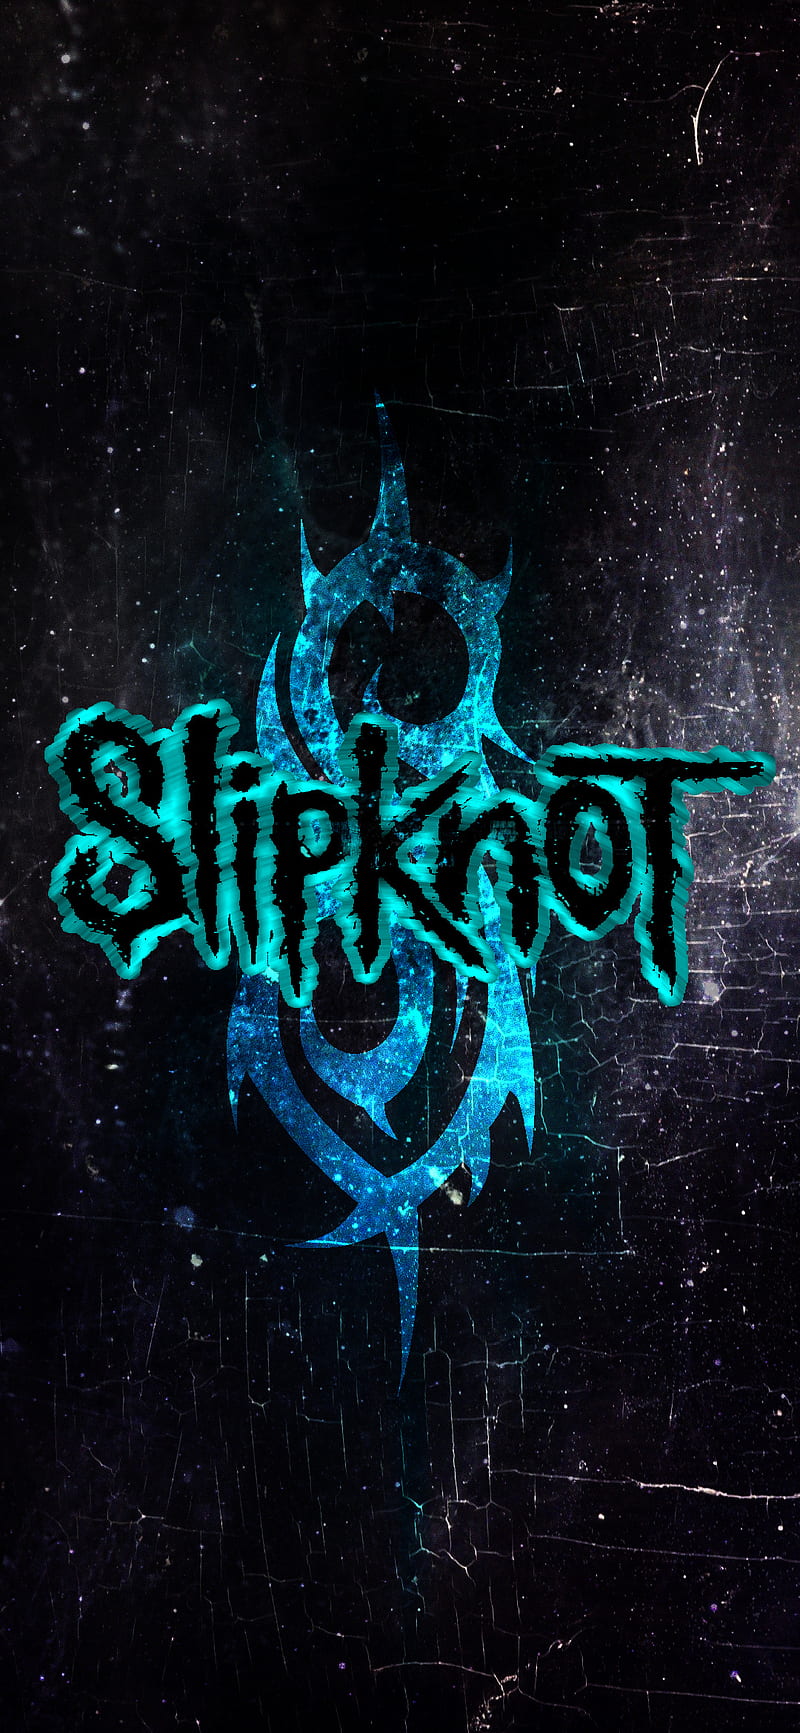 60 Slipknot HD Wallpapers and Backgrounds